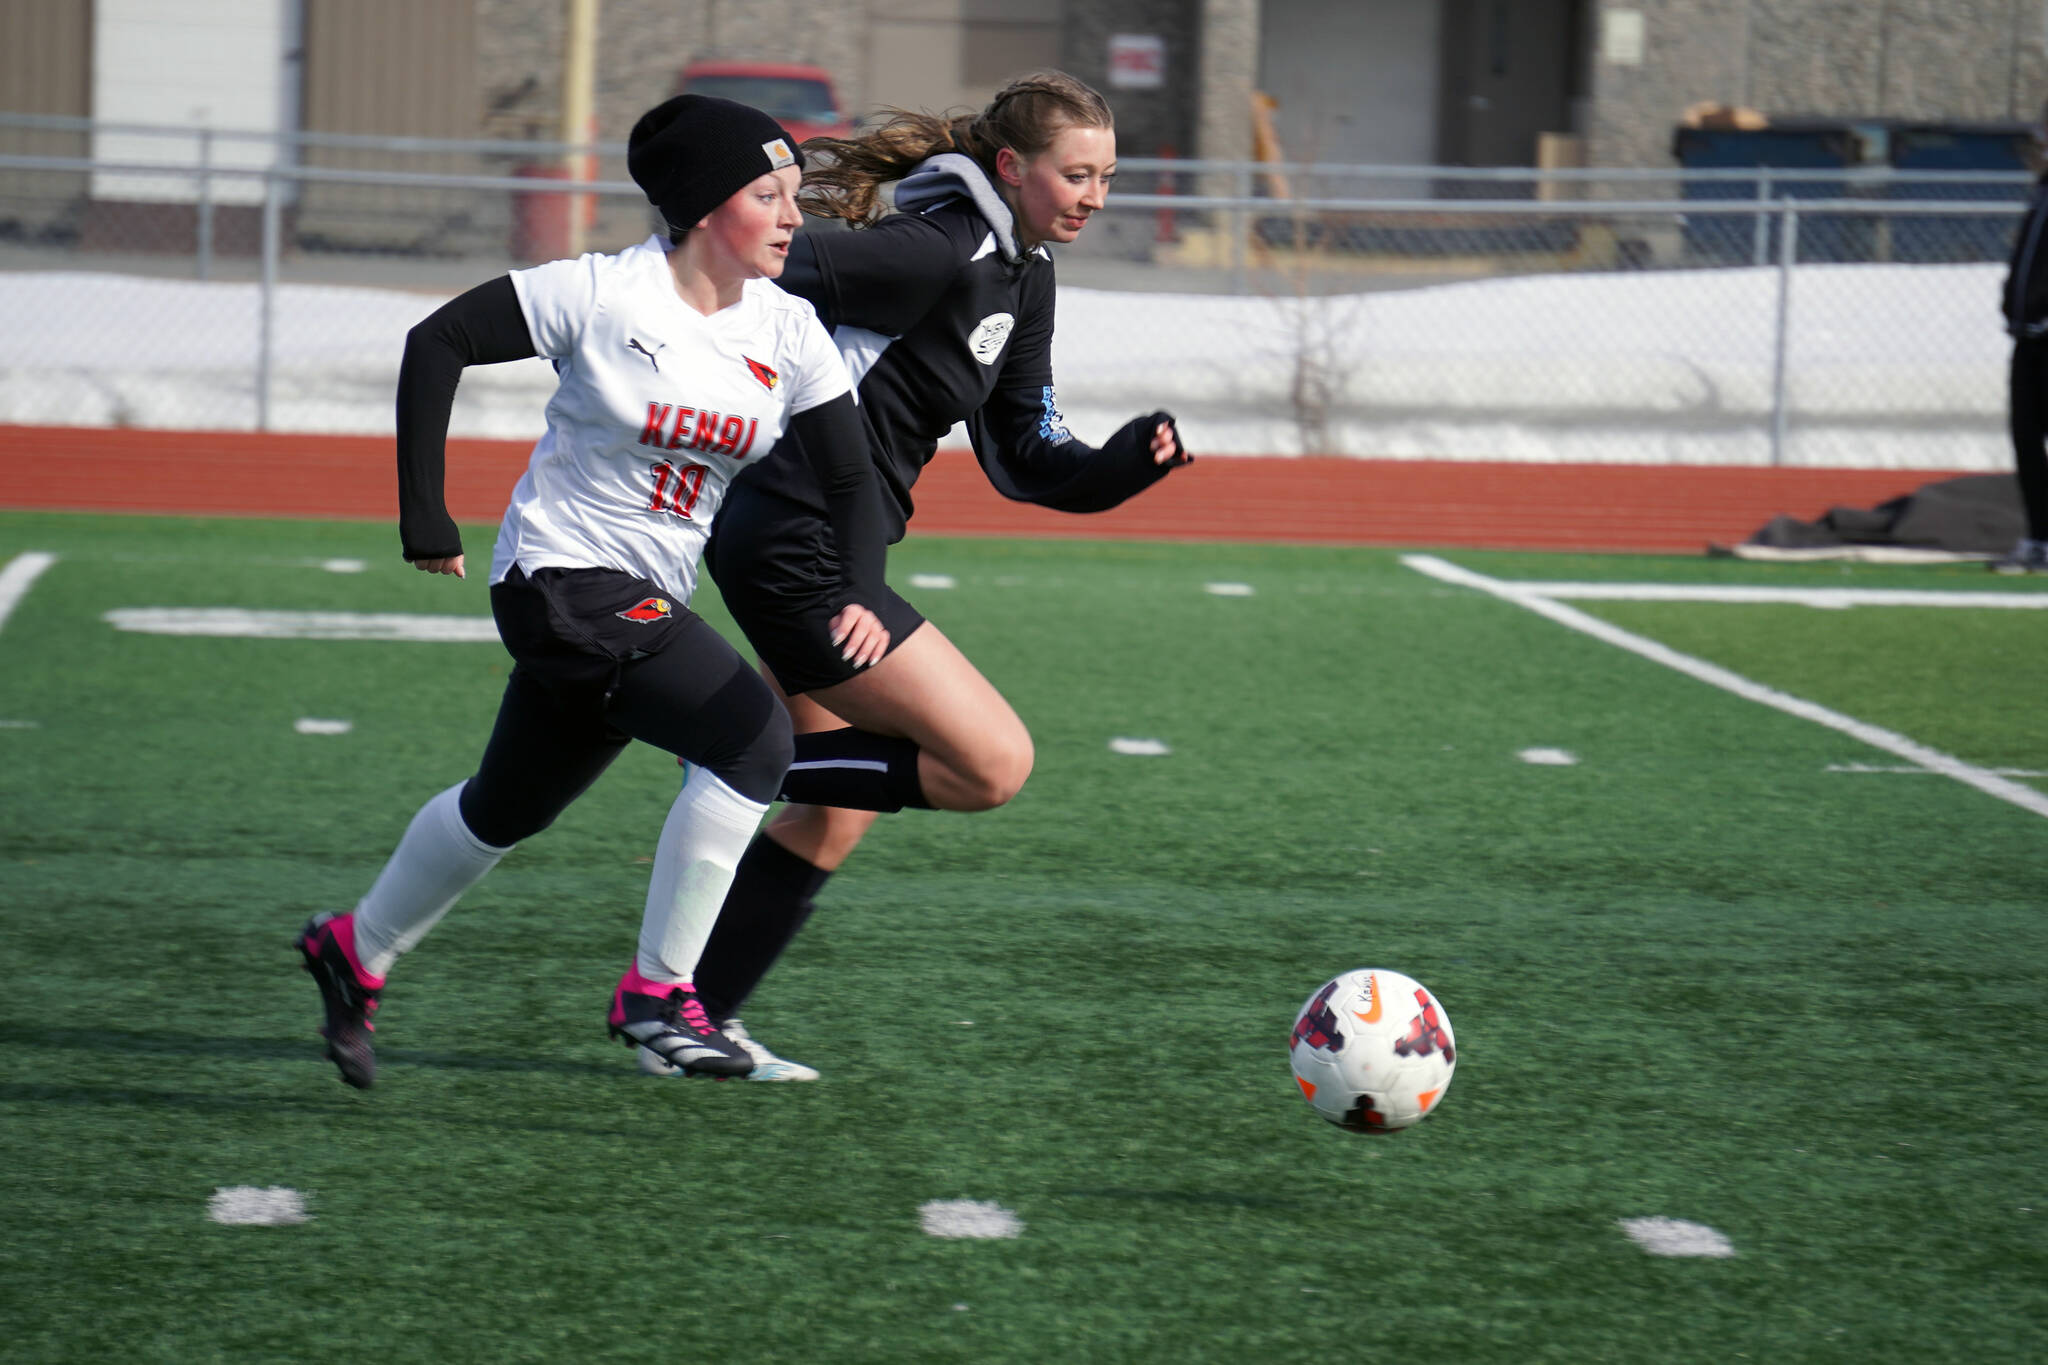 Kenai Central’s Kylee Verkuilen races Nikiski for control of the ball during a soccer game at Ed Hollier Field in Kenai, Alaska, on Friday, April 12, 2024. (Jake Dye/Peninsula Clarion)